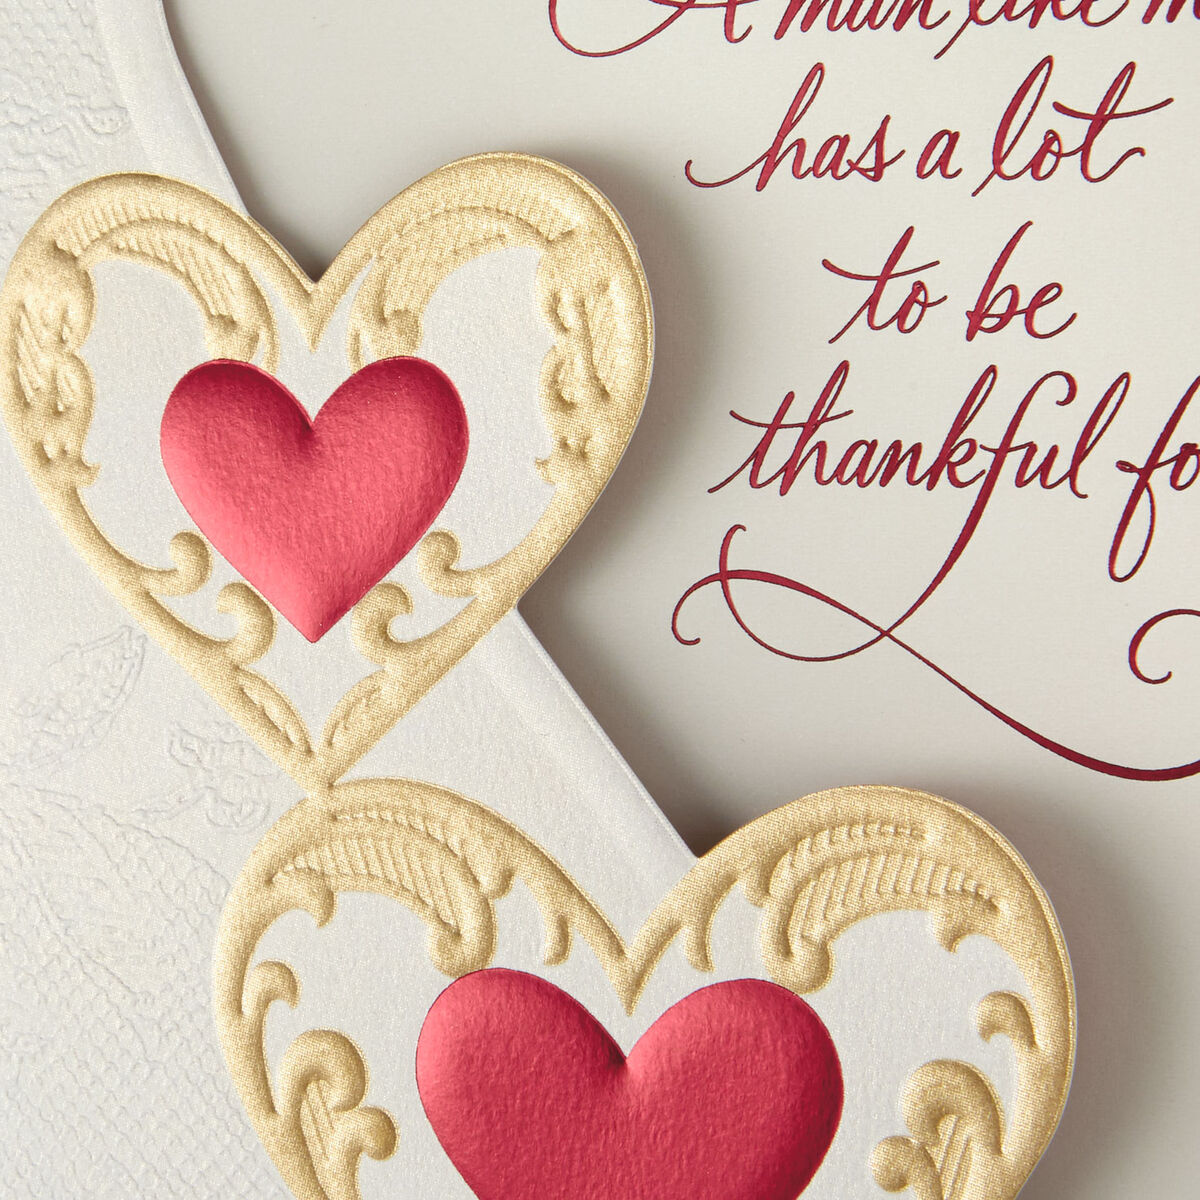 a-lot-to-be-thankful-for-sweetest-day-card-greeting-cards-hallmark